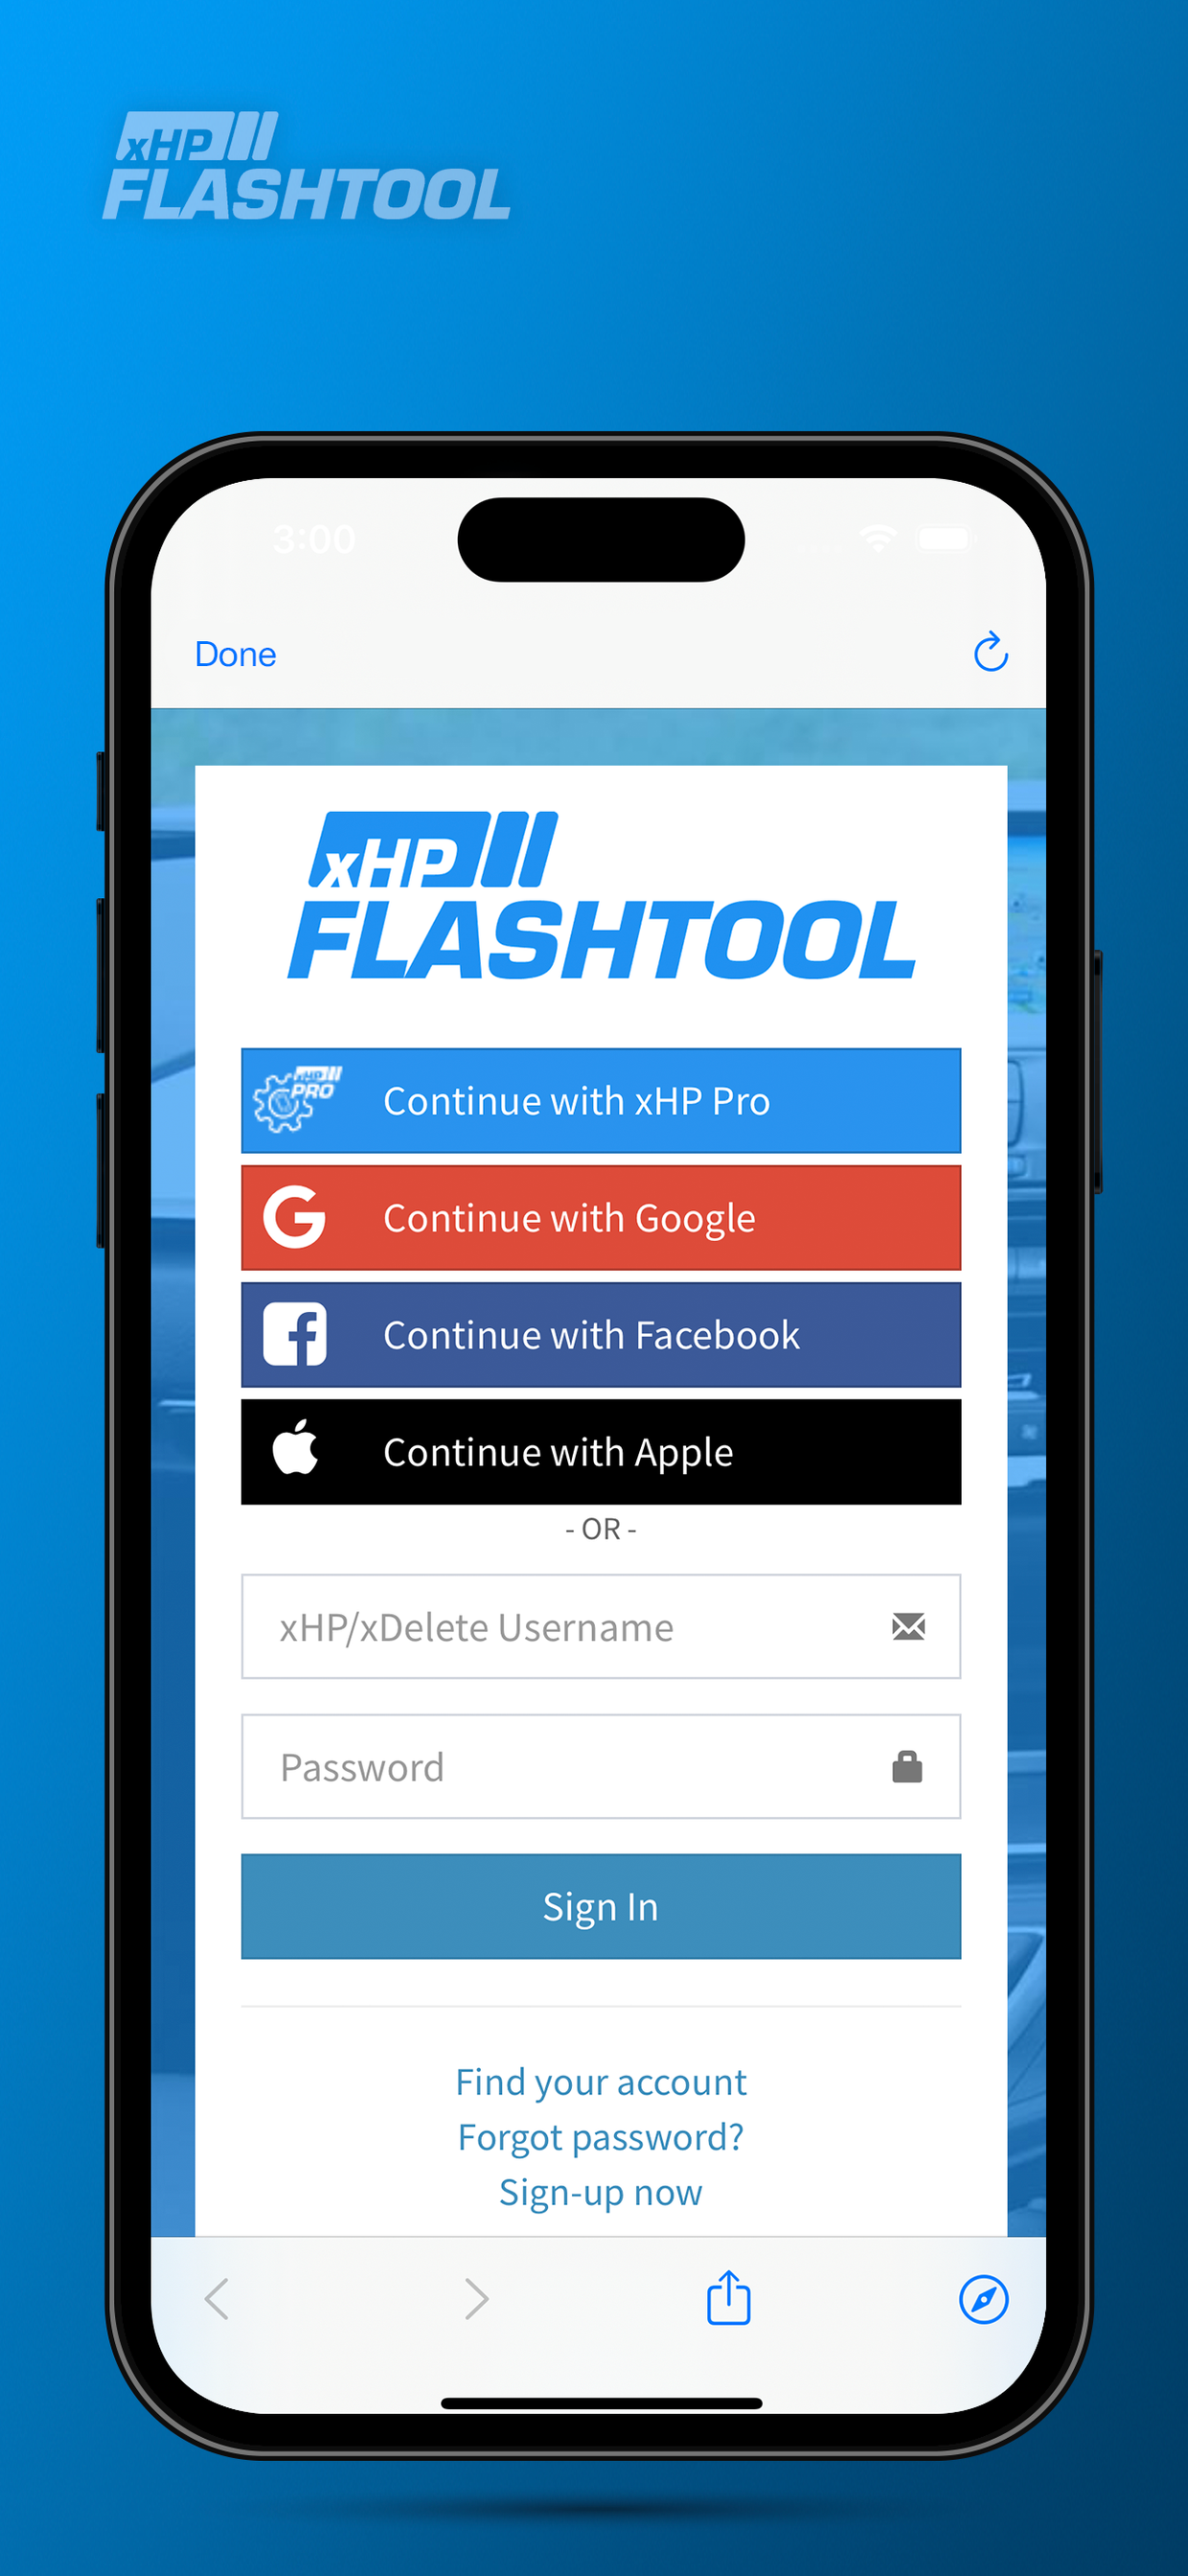 Login Screen of the xHP Flashtool App possible login with socials like Accounts of Google, Facebook or Apple or xHP/xDelete Username